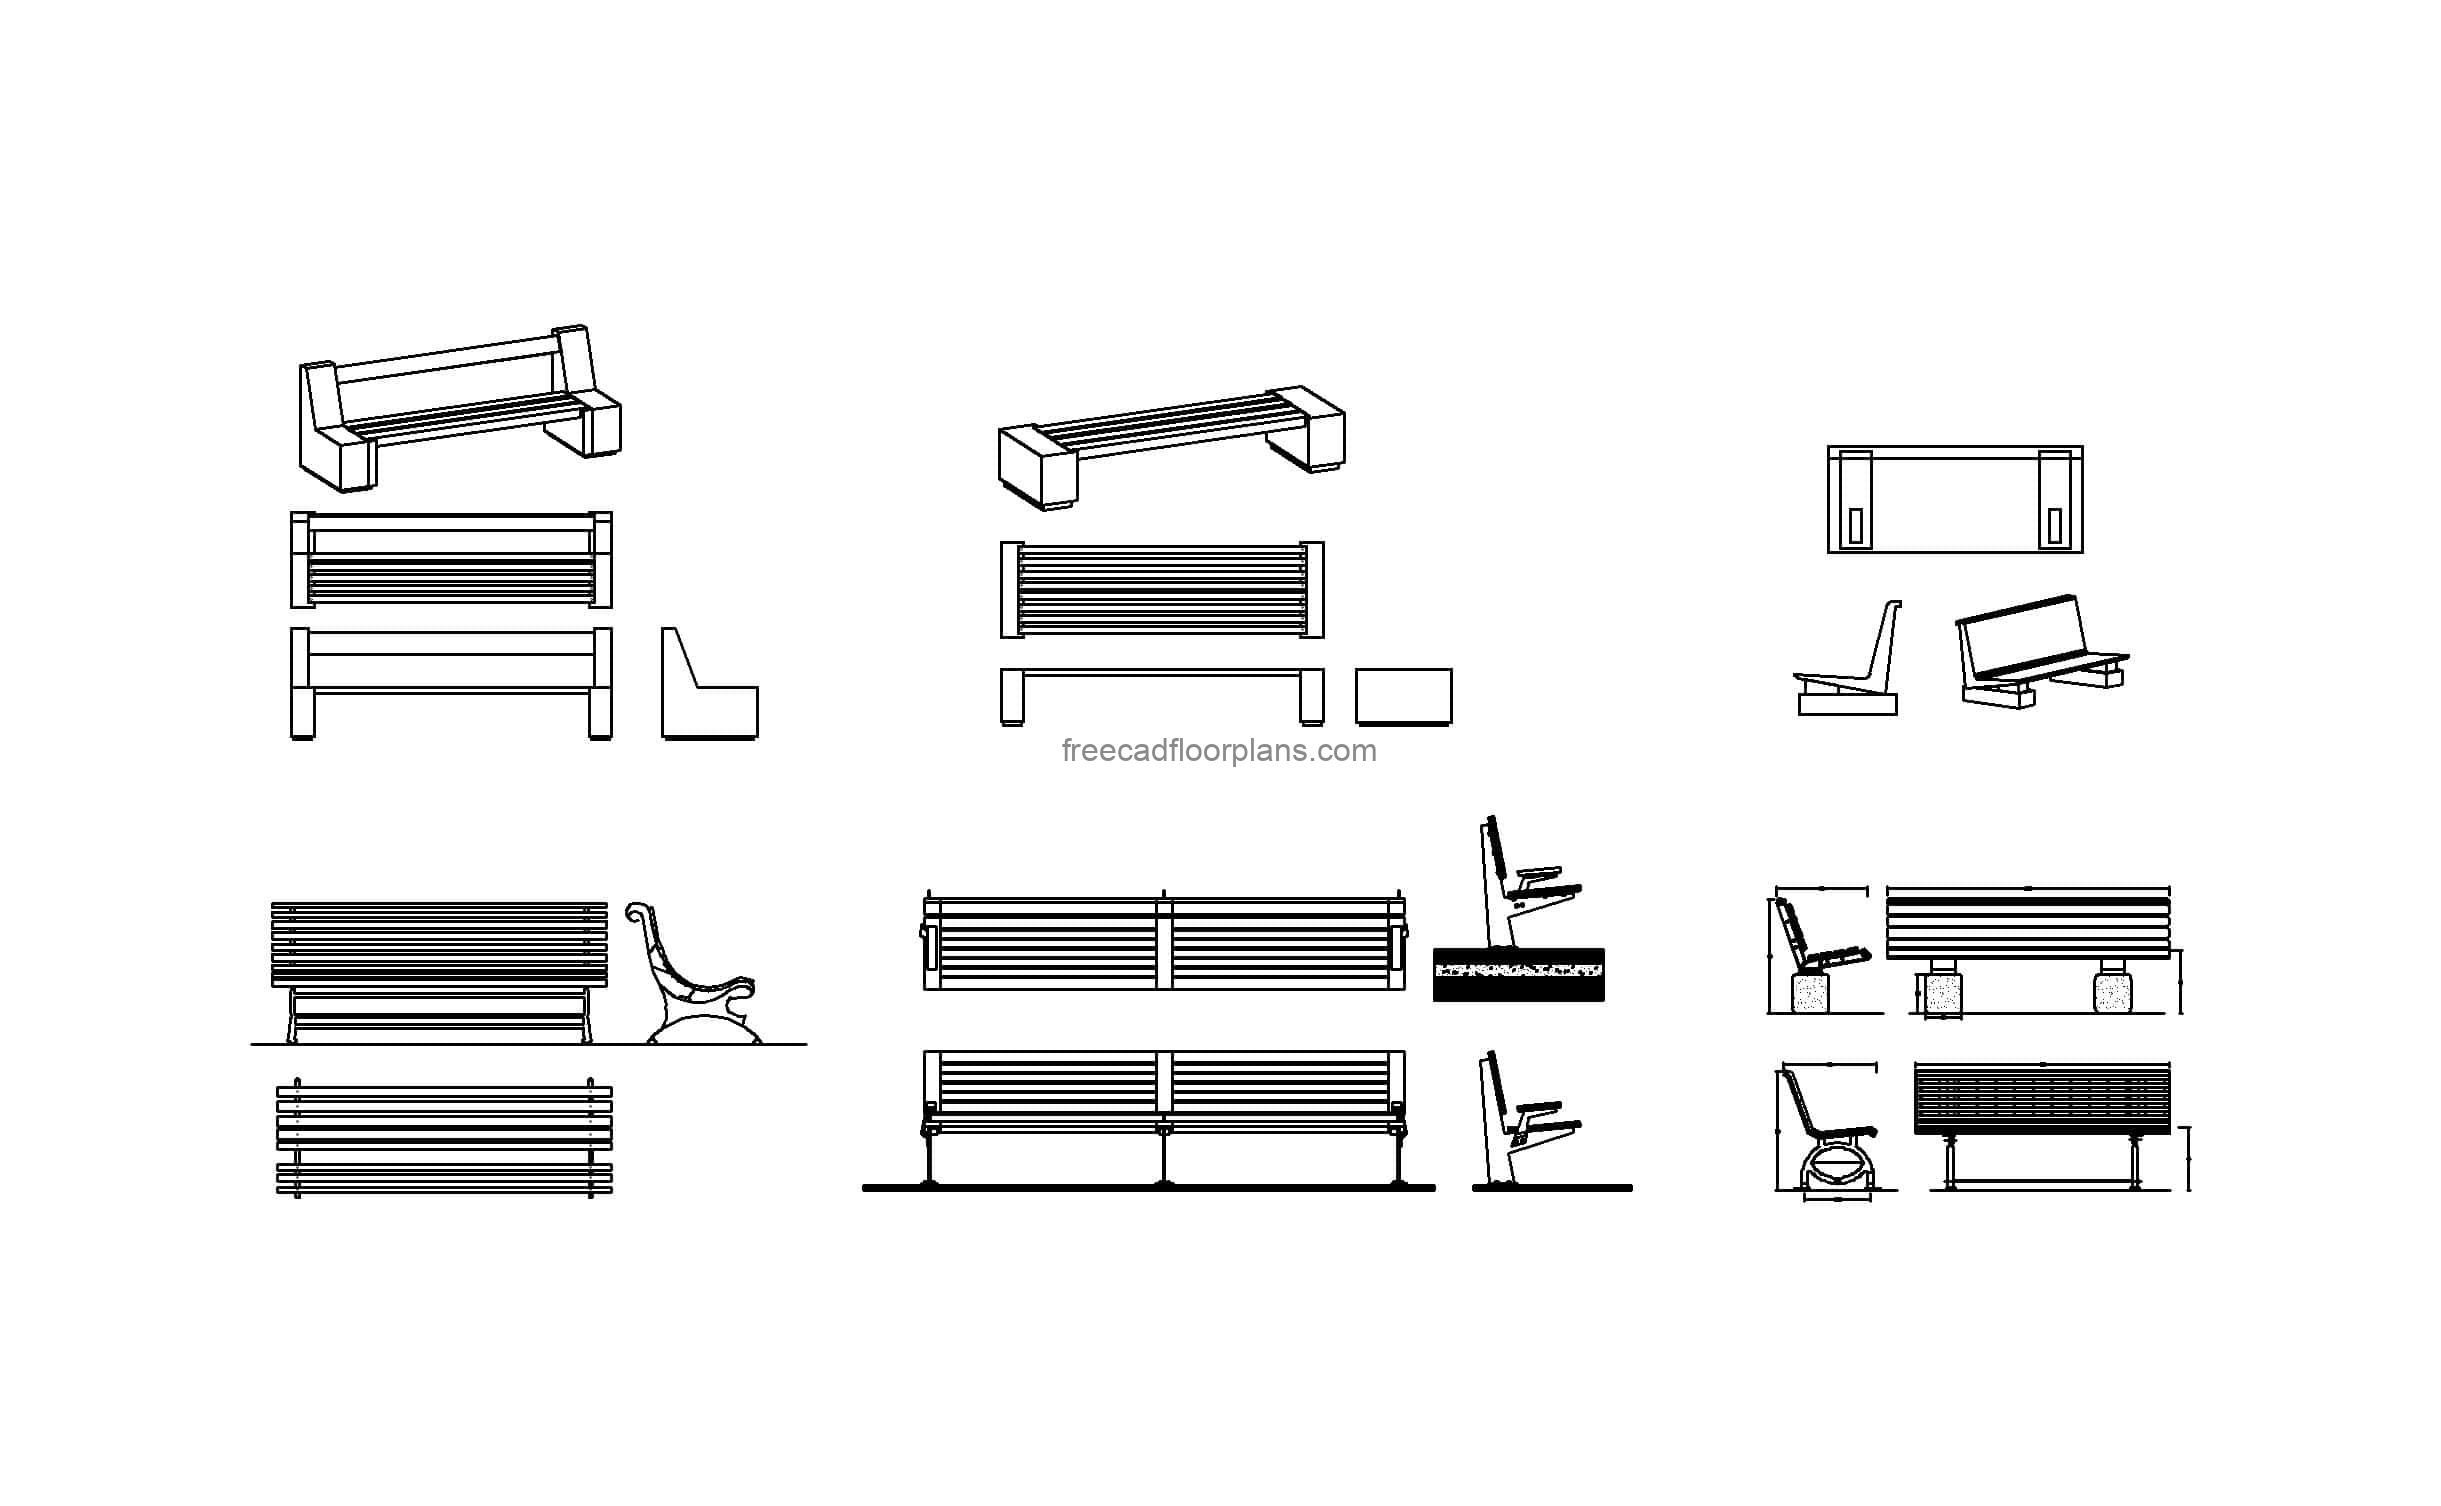 autocad drawing of different urban benches, dwg file for free download plan and elevation views